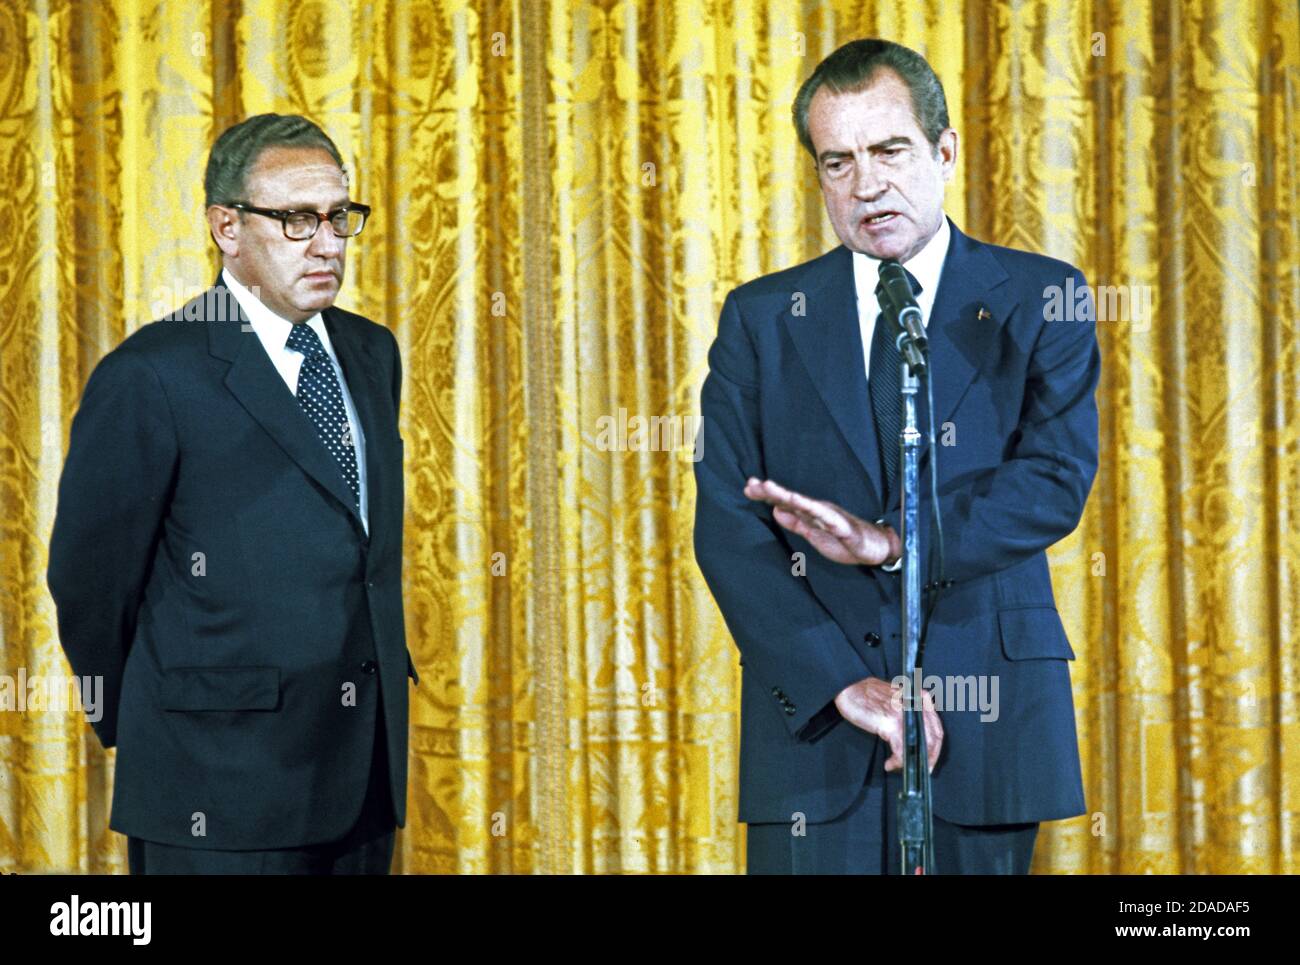 United States President Richard M. Nixon, right, makes remarks prior to Henry A. Kissinger, left, being sworn-in as the 56th United States Secretary of State in the East Room of the White House on September 22, 1973. Kissinger will continue to serve as National Security Advisor. He is the first naturalized citizen to serve as Secretary of State.Credit: Benjamin E. 'Gene' Forte - CNP | usage worldwide Stock Photo